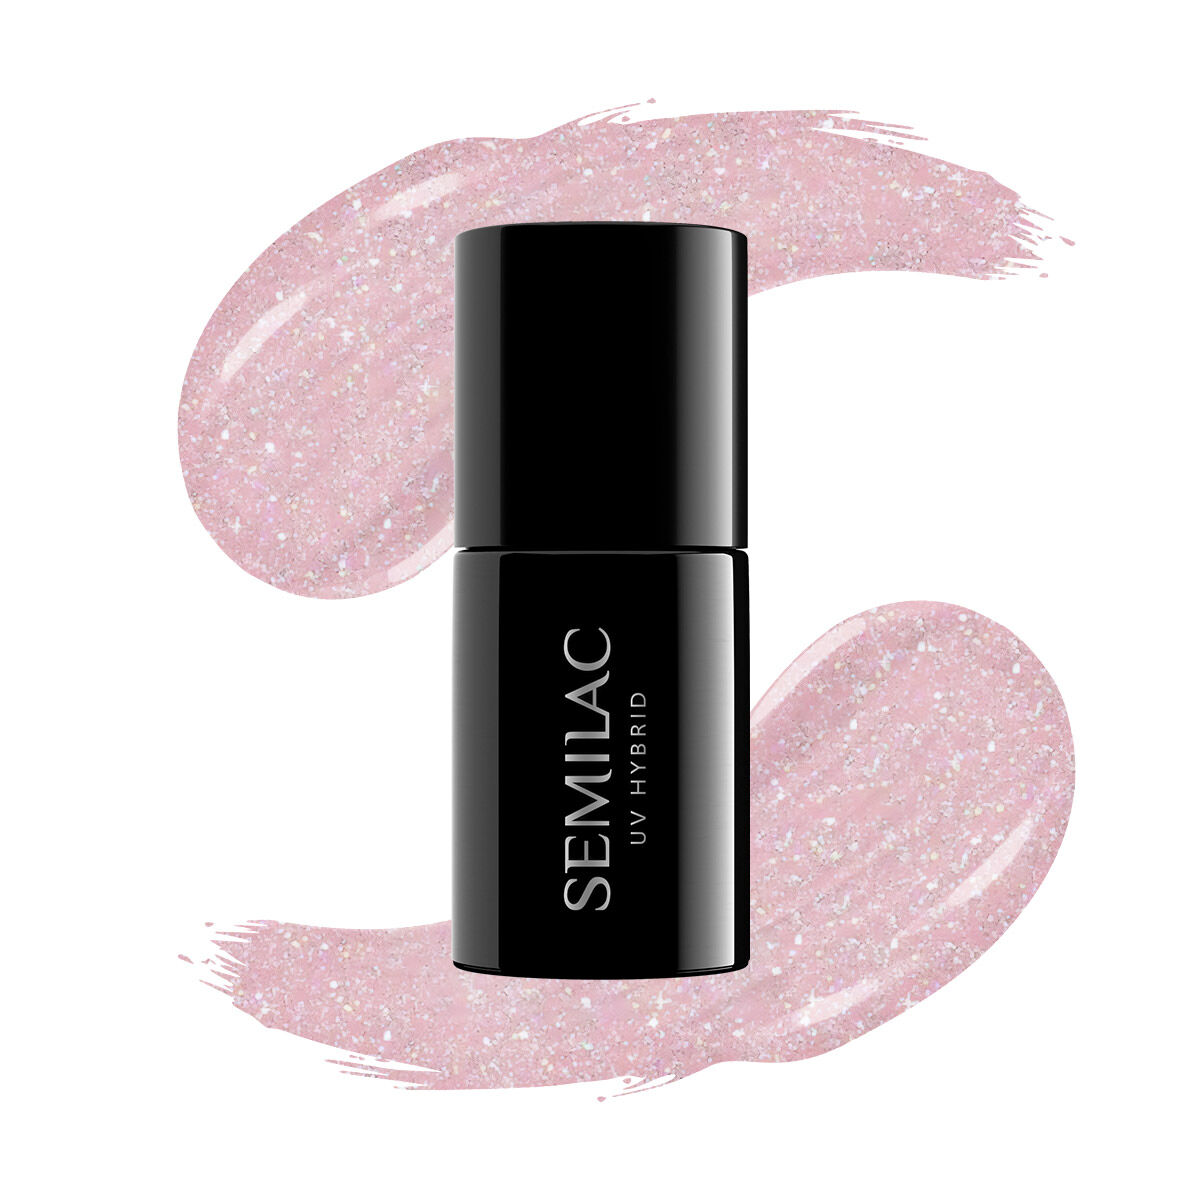 SEMILAC Extend 5in1 - 7 ml - No. 805 Glitter Dirty Nude Rose